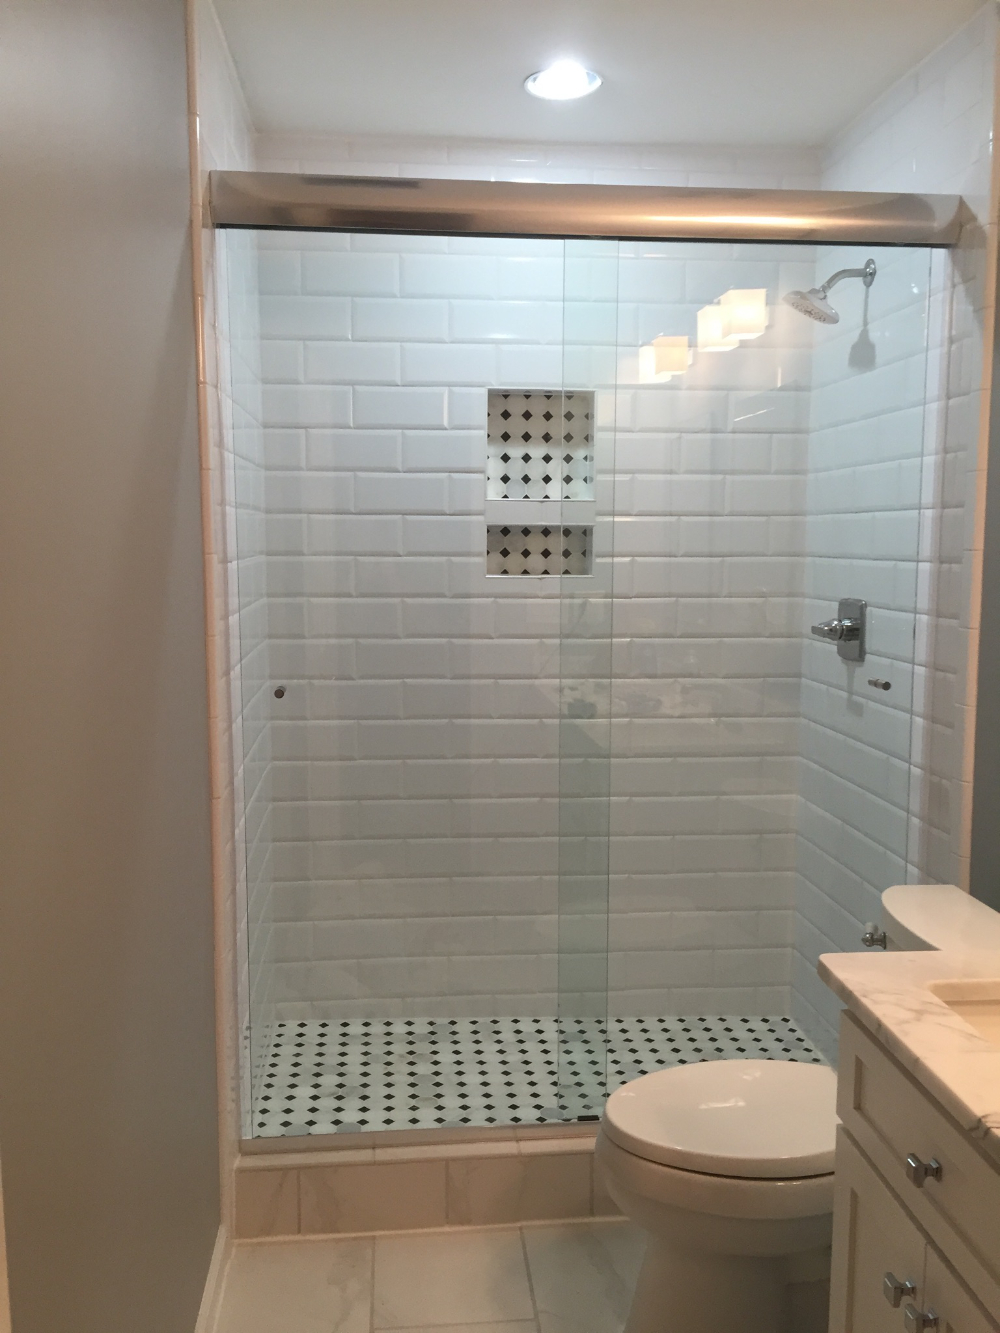 Regular clear glass was used on this shower; OptiWhite would be an awesome option to consider for a cleaner look!